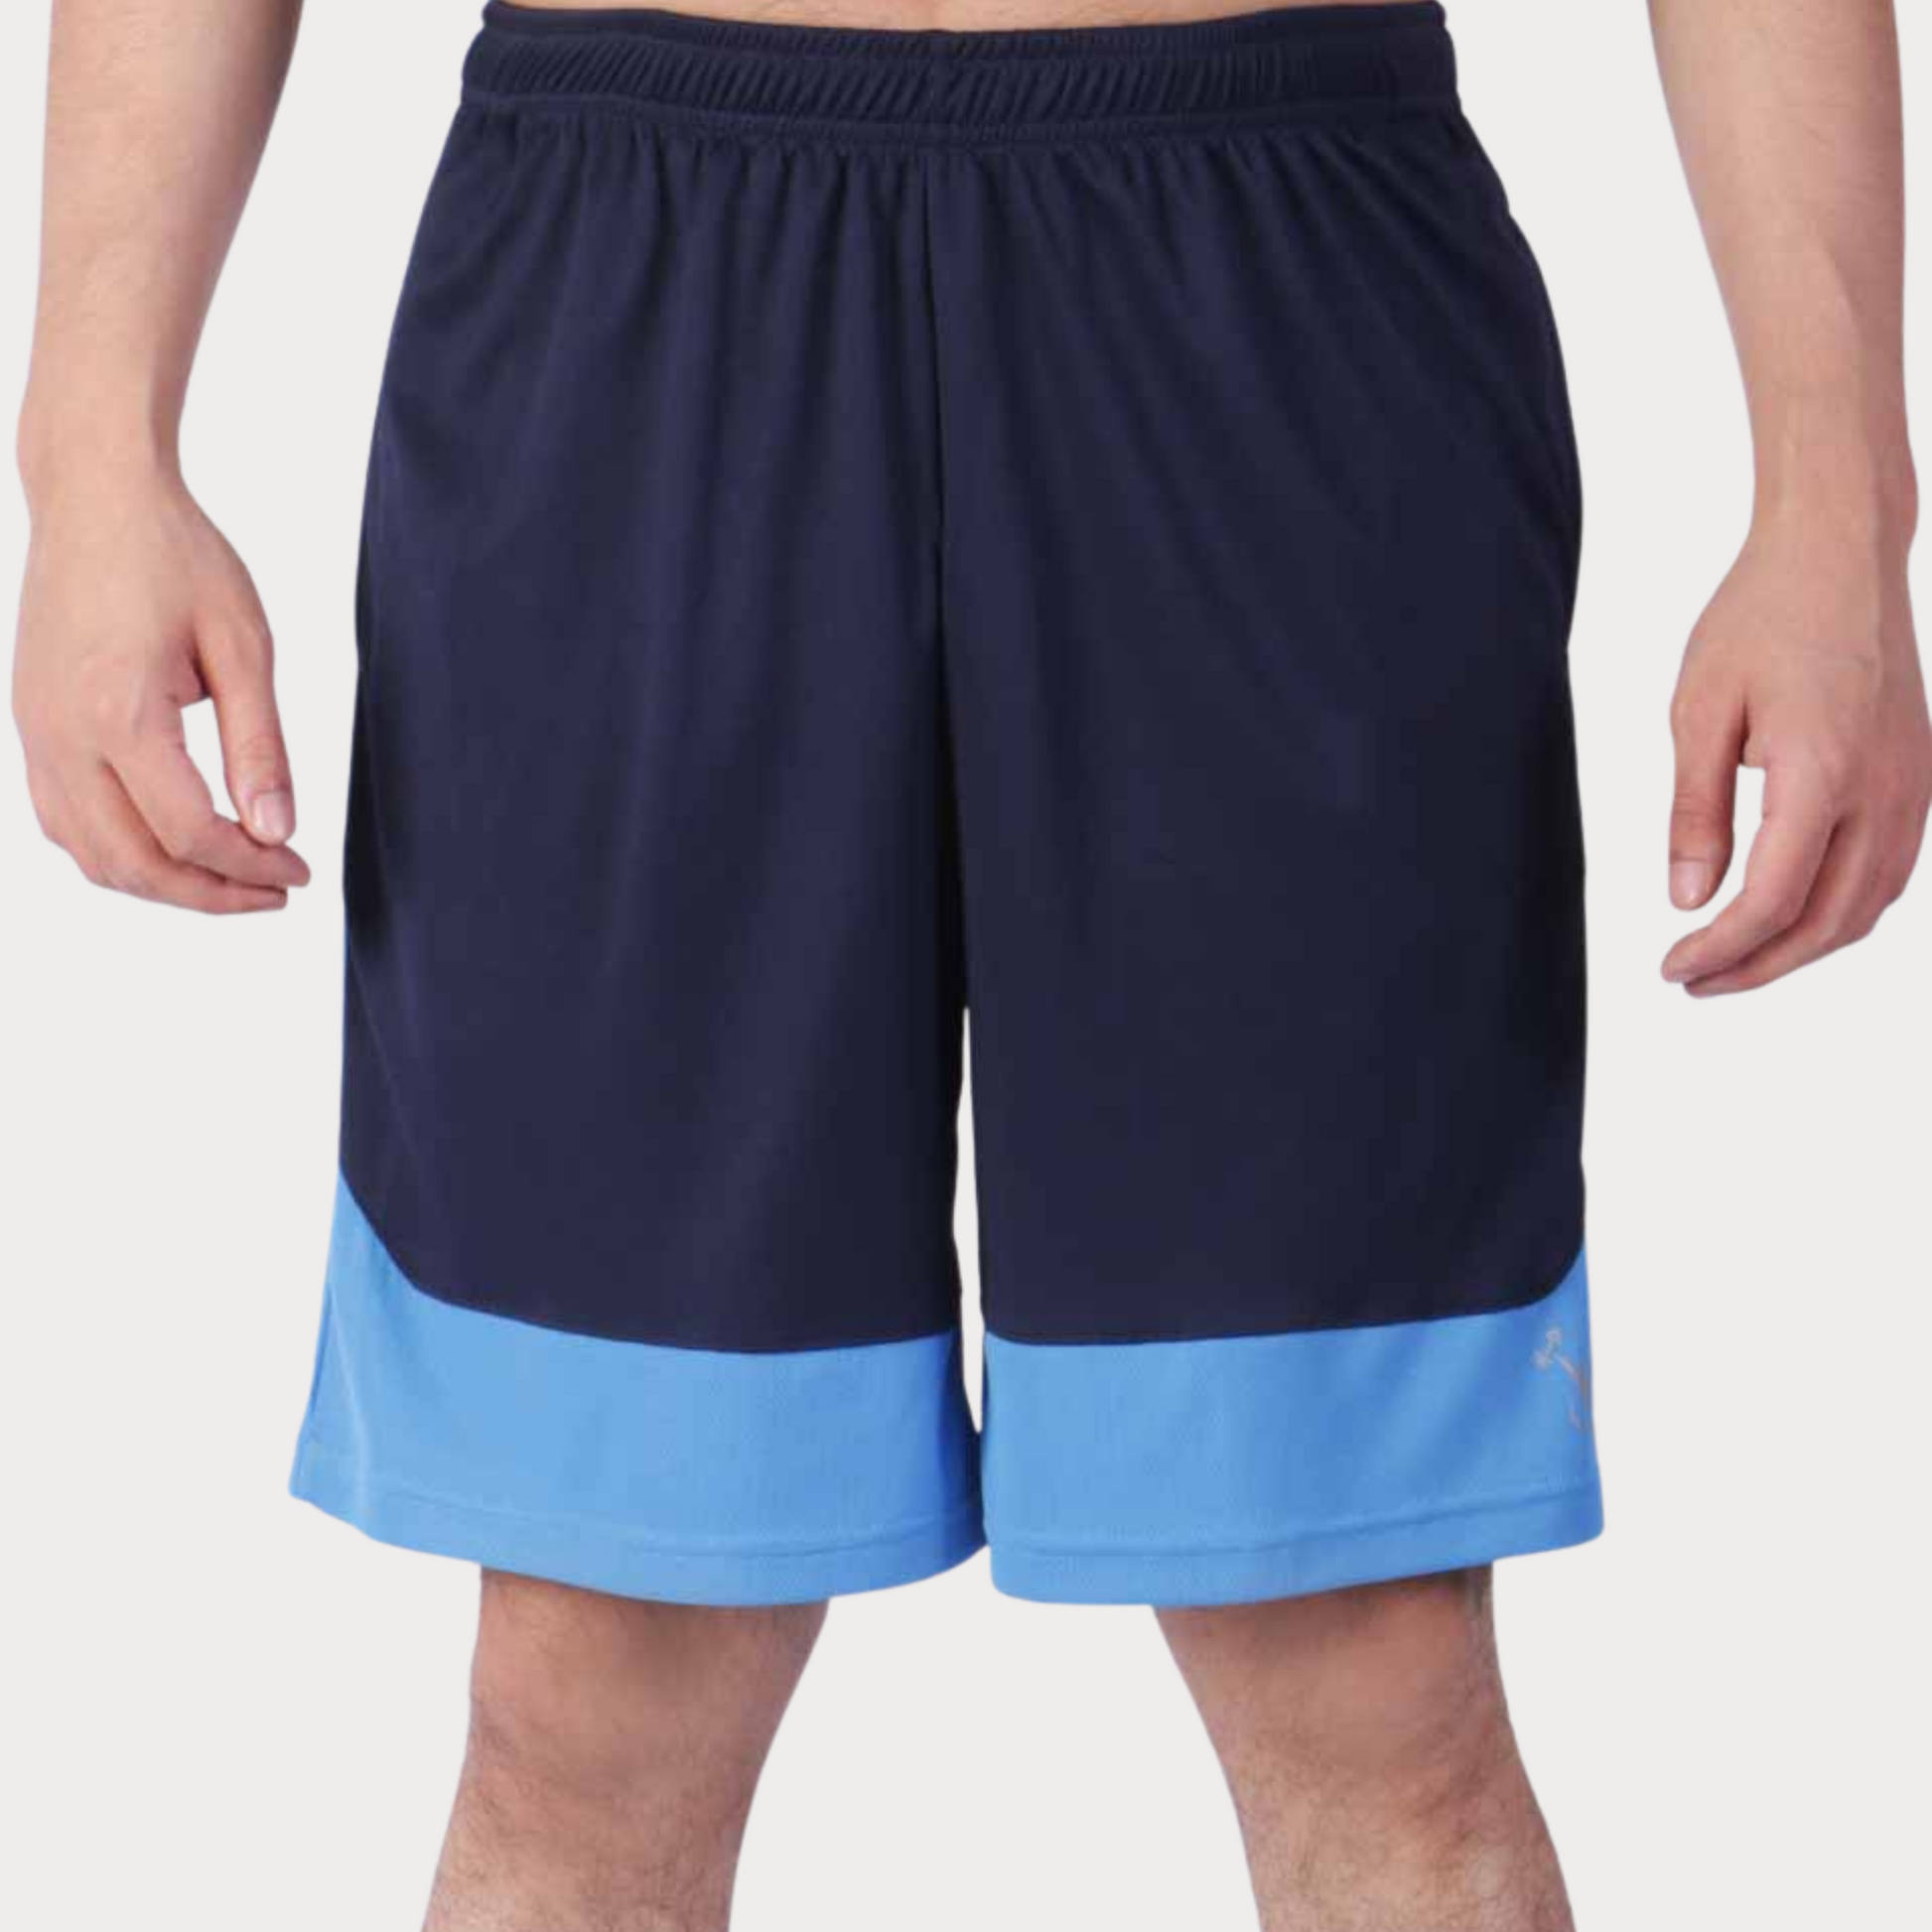 Shorts Activewear / Sportswear - Men's Classic Textured Loose Fit Shorts - S / Xavier Navy - Outperformer